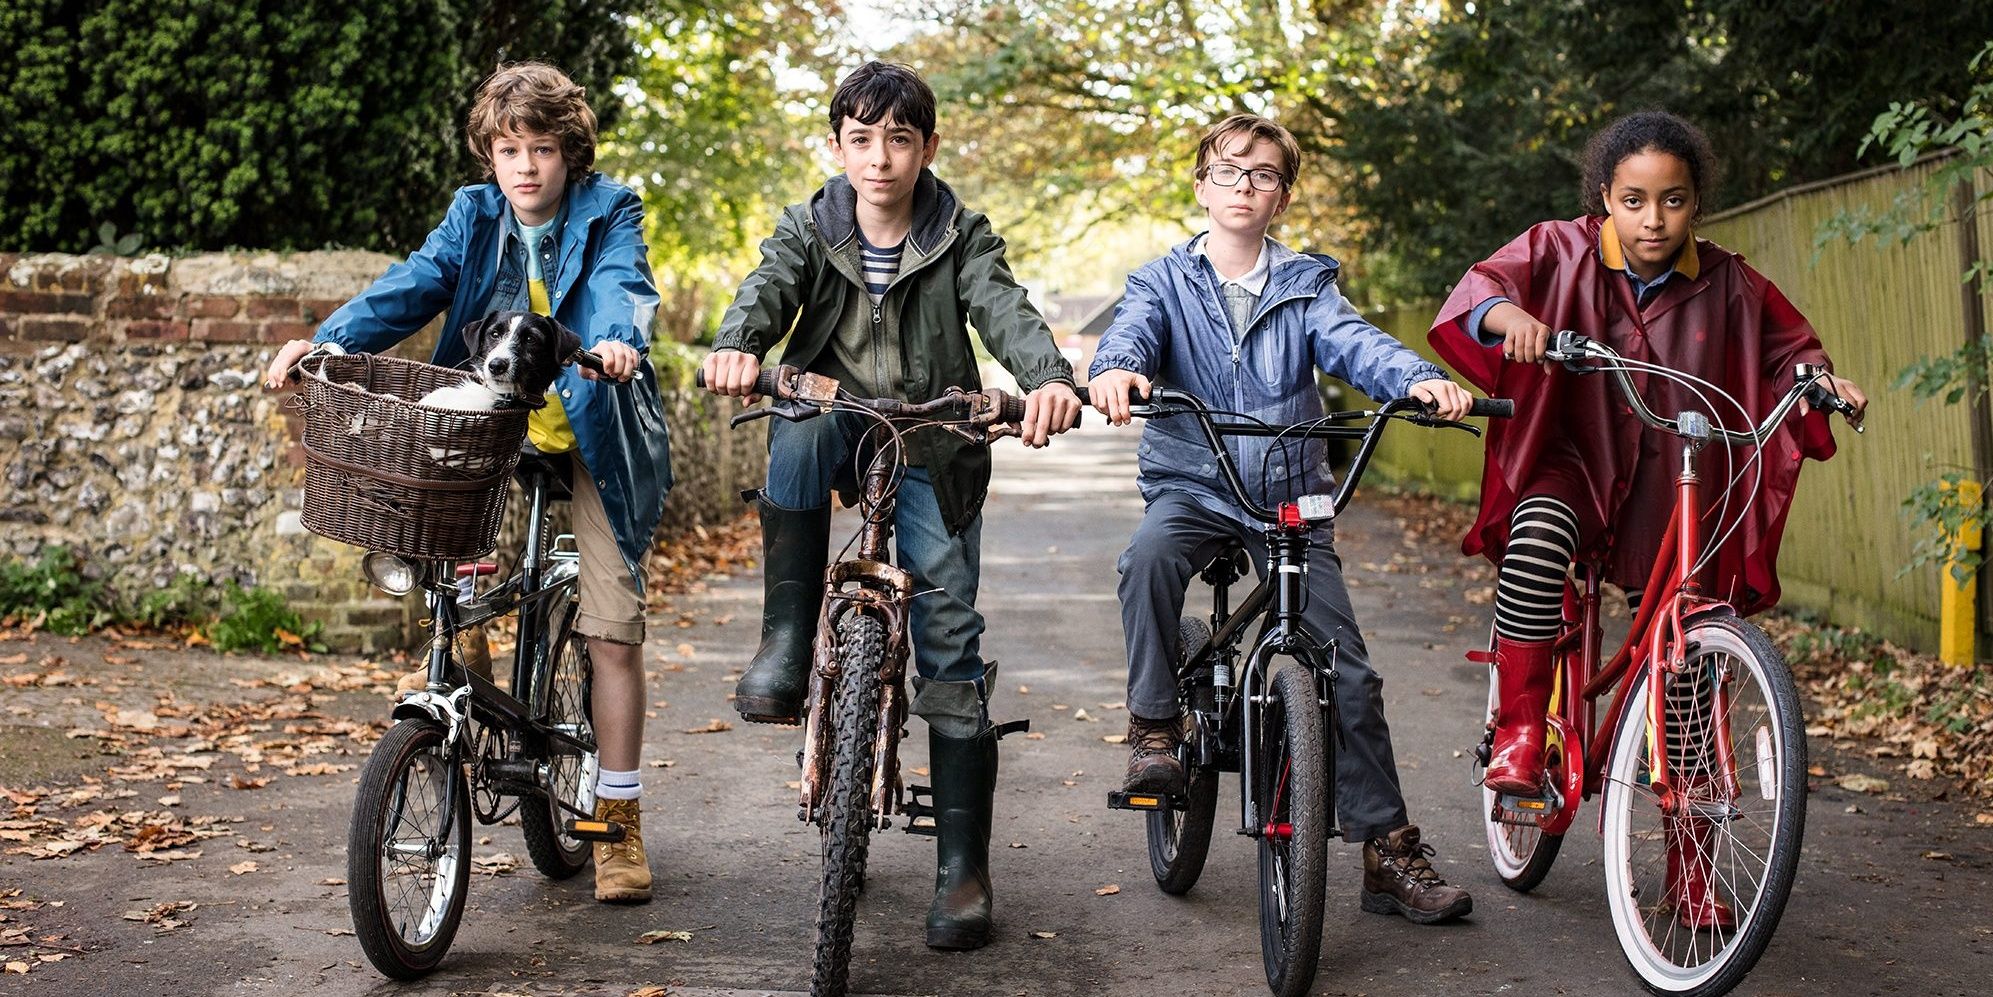 Sam Taylor Buck, Ilan Galkoff, Alfie Taylor and Amma Ris in Good Omens